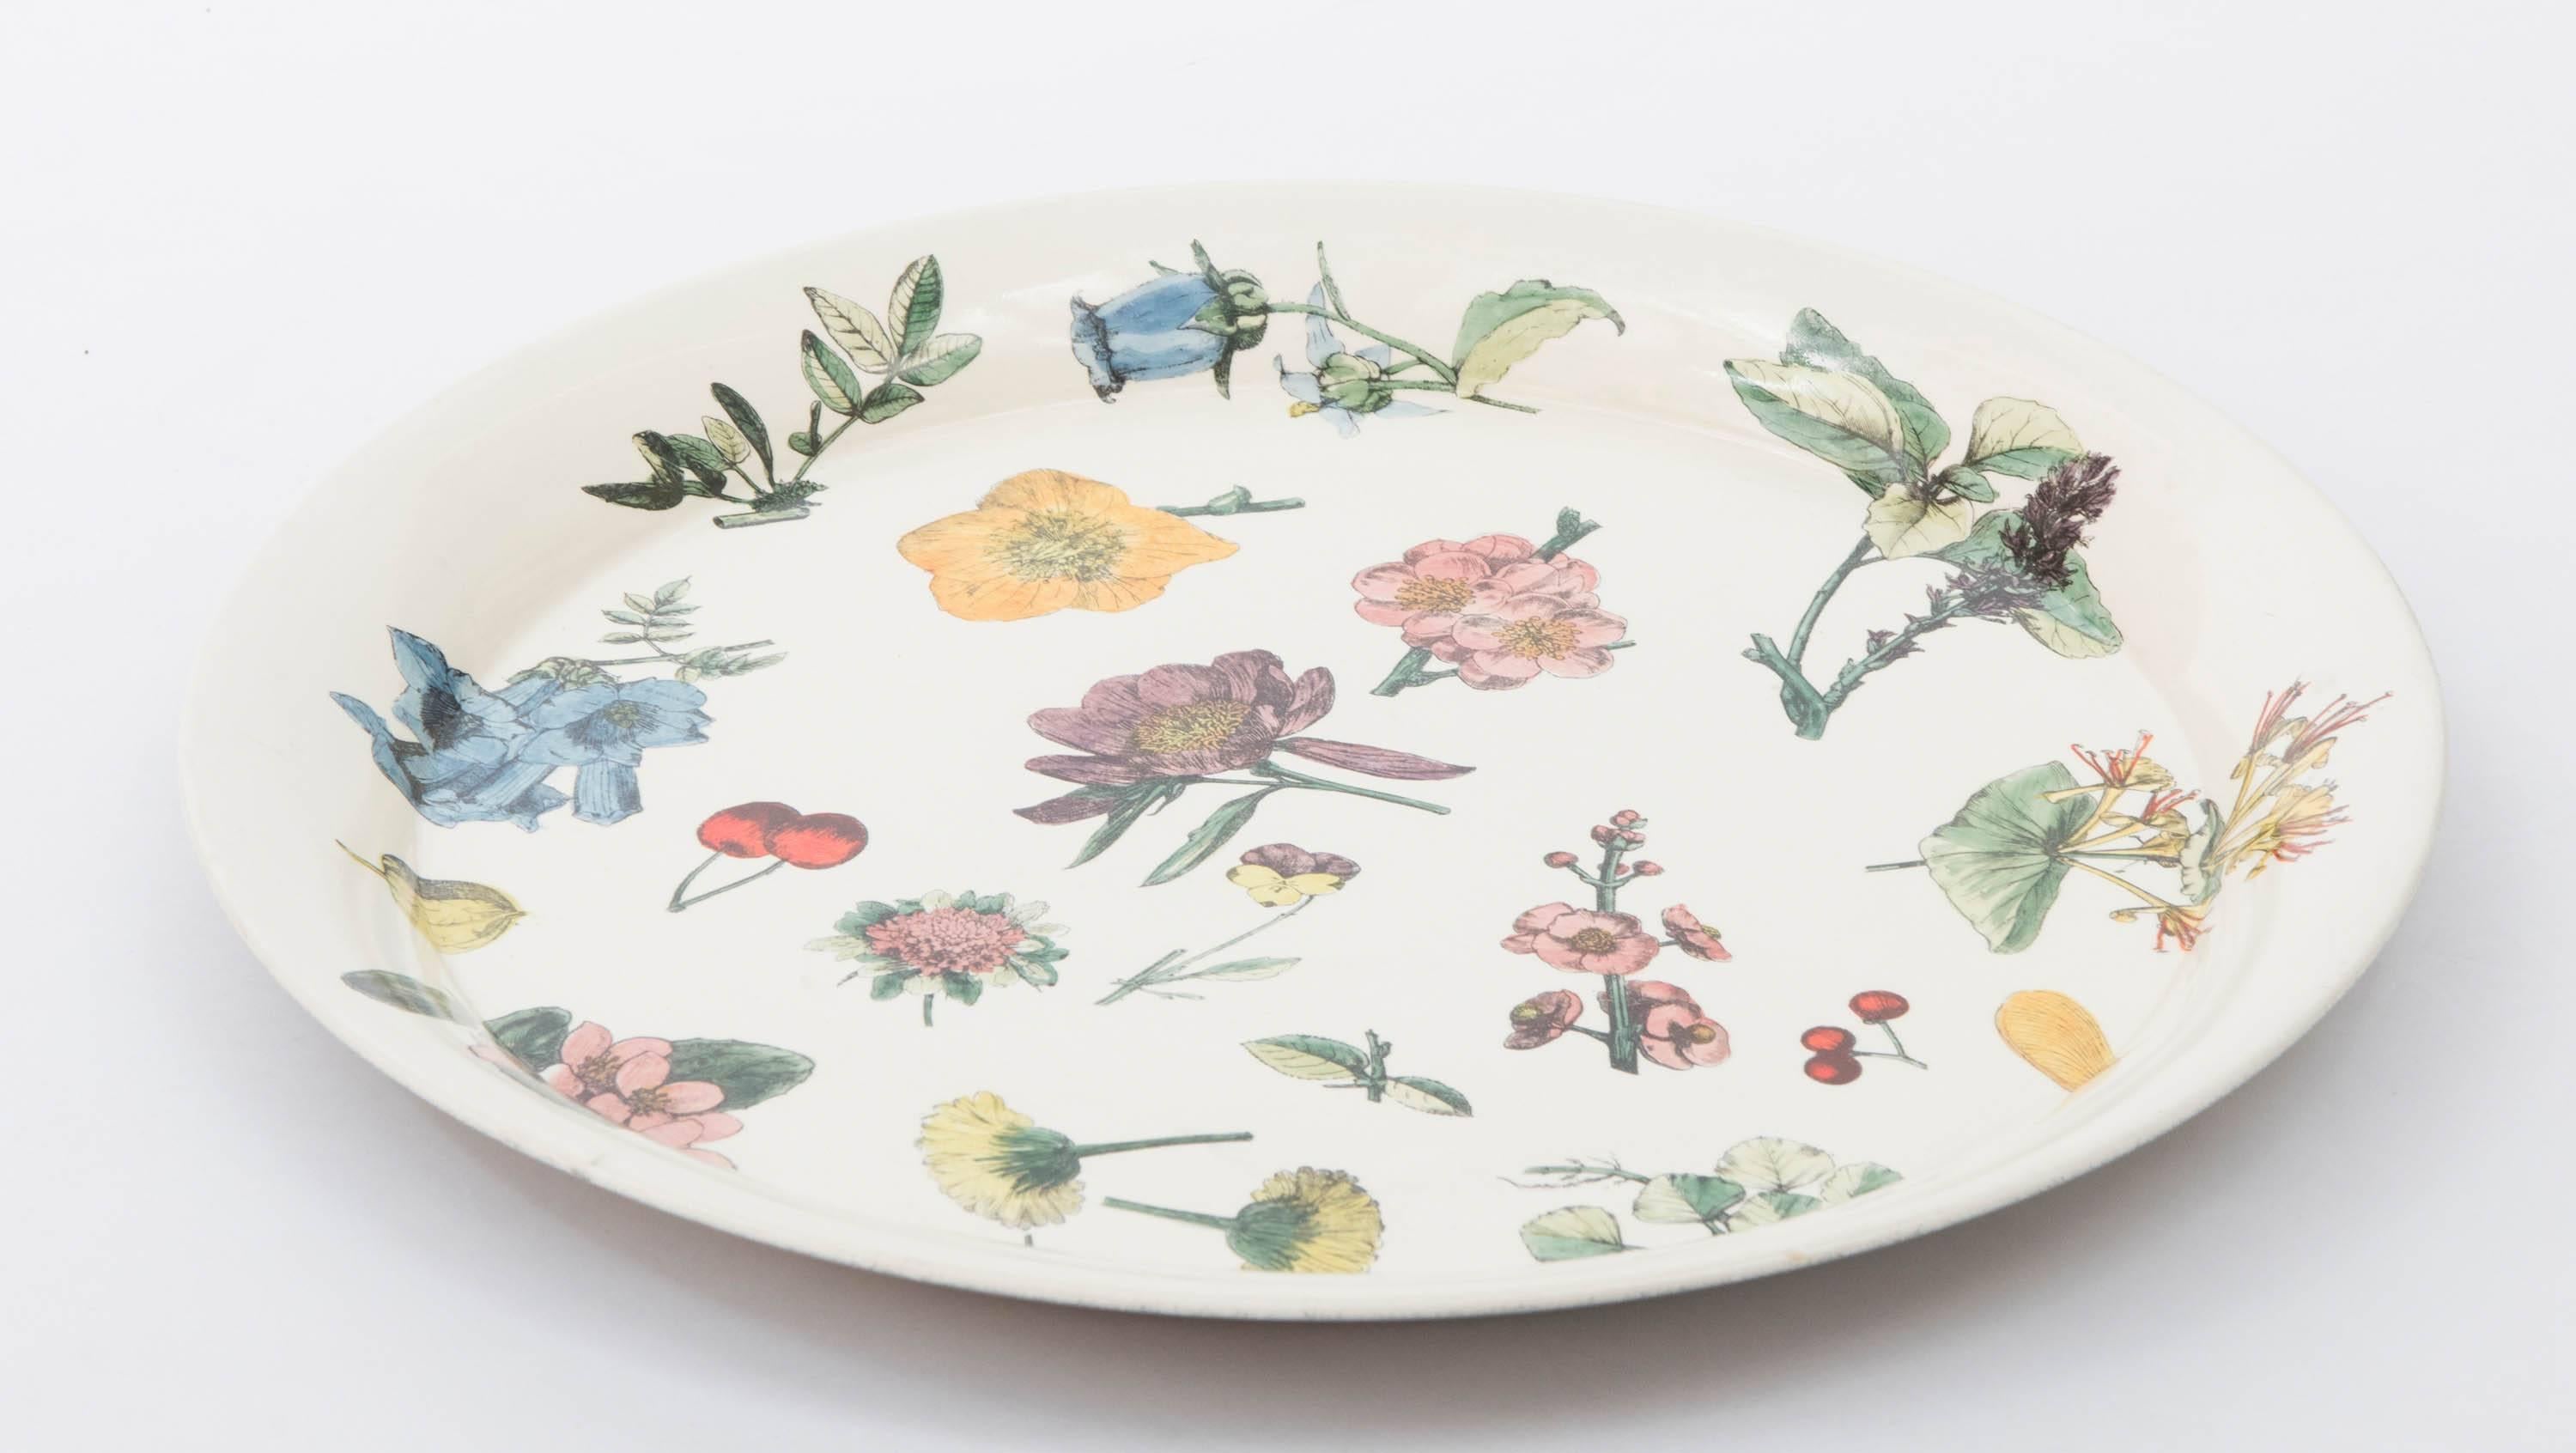 Piero Fornasetti rare early metal tray “Fiori et bacche sparse” of circular form. 
Lithographically printed and hand colored with flora against a white/ cream ground.
Italy, circa 1950.
39.8 cm diameter x 3 cm high.
  